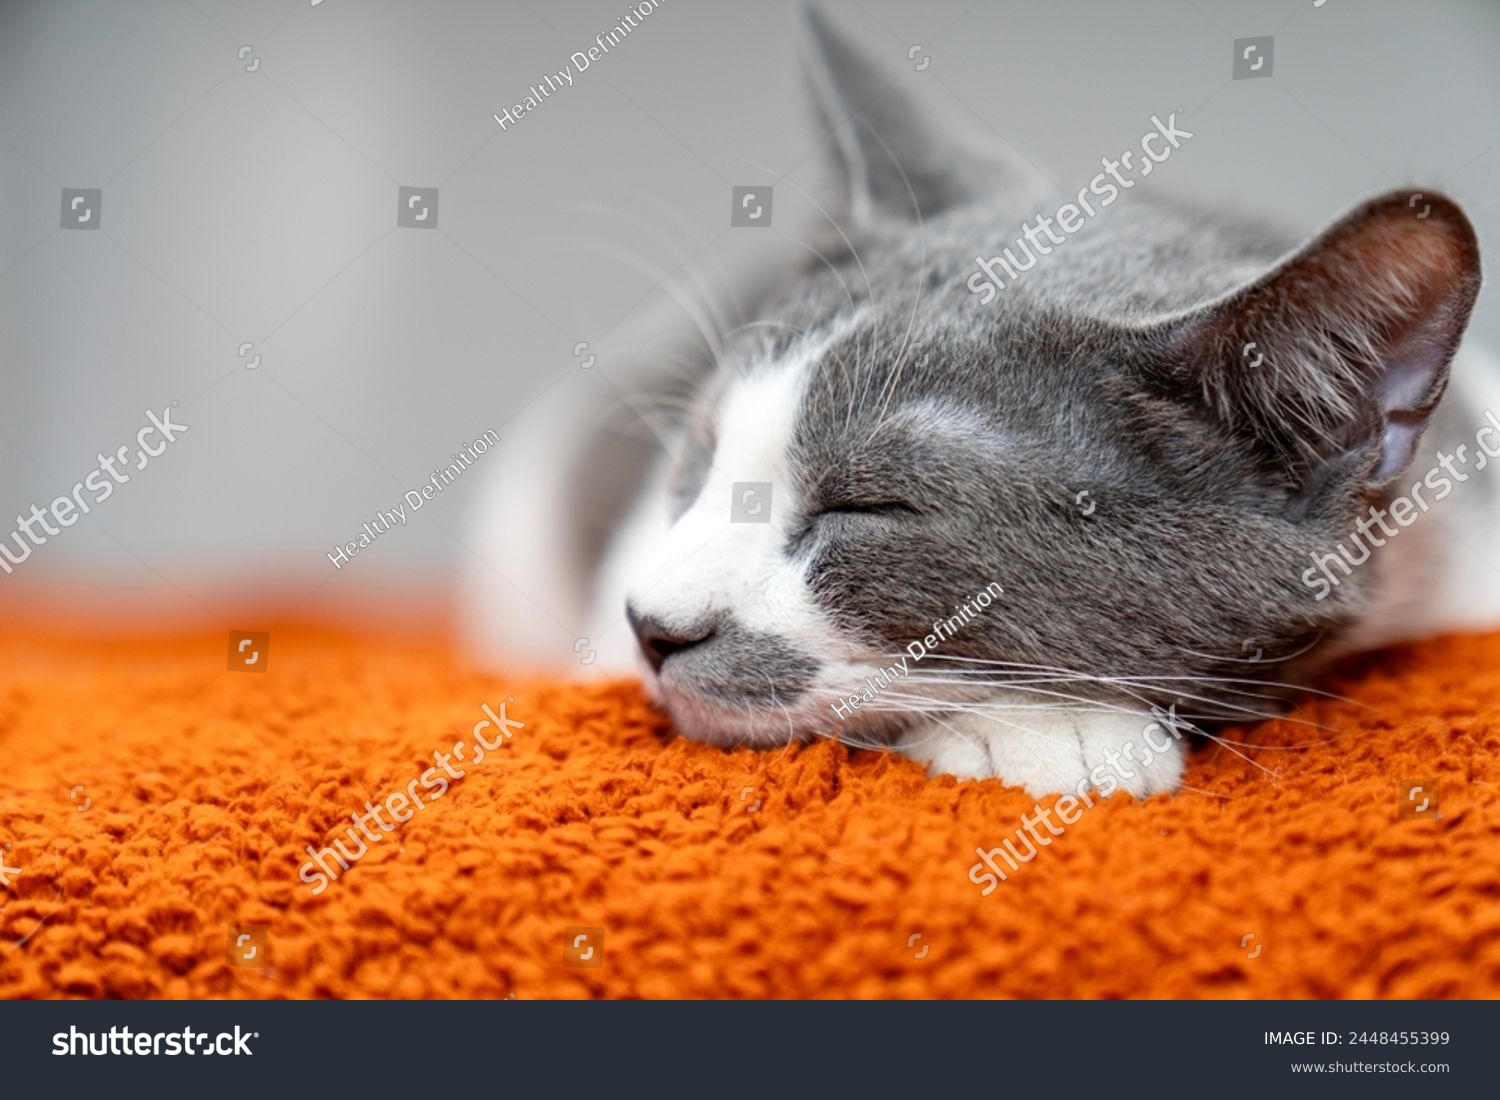 Cute gray white cat on orange plaid. Pet warms under a blanket in cold winter weather. a gray and white cat sleeping under a blanket. Pets friendly and care concept. domestic cat on sofa #2448455399